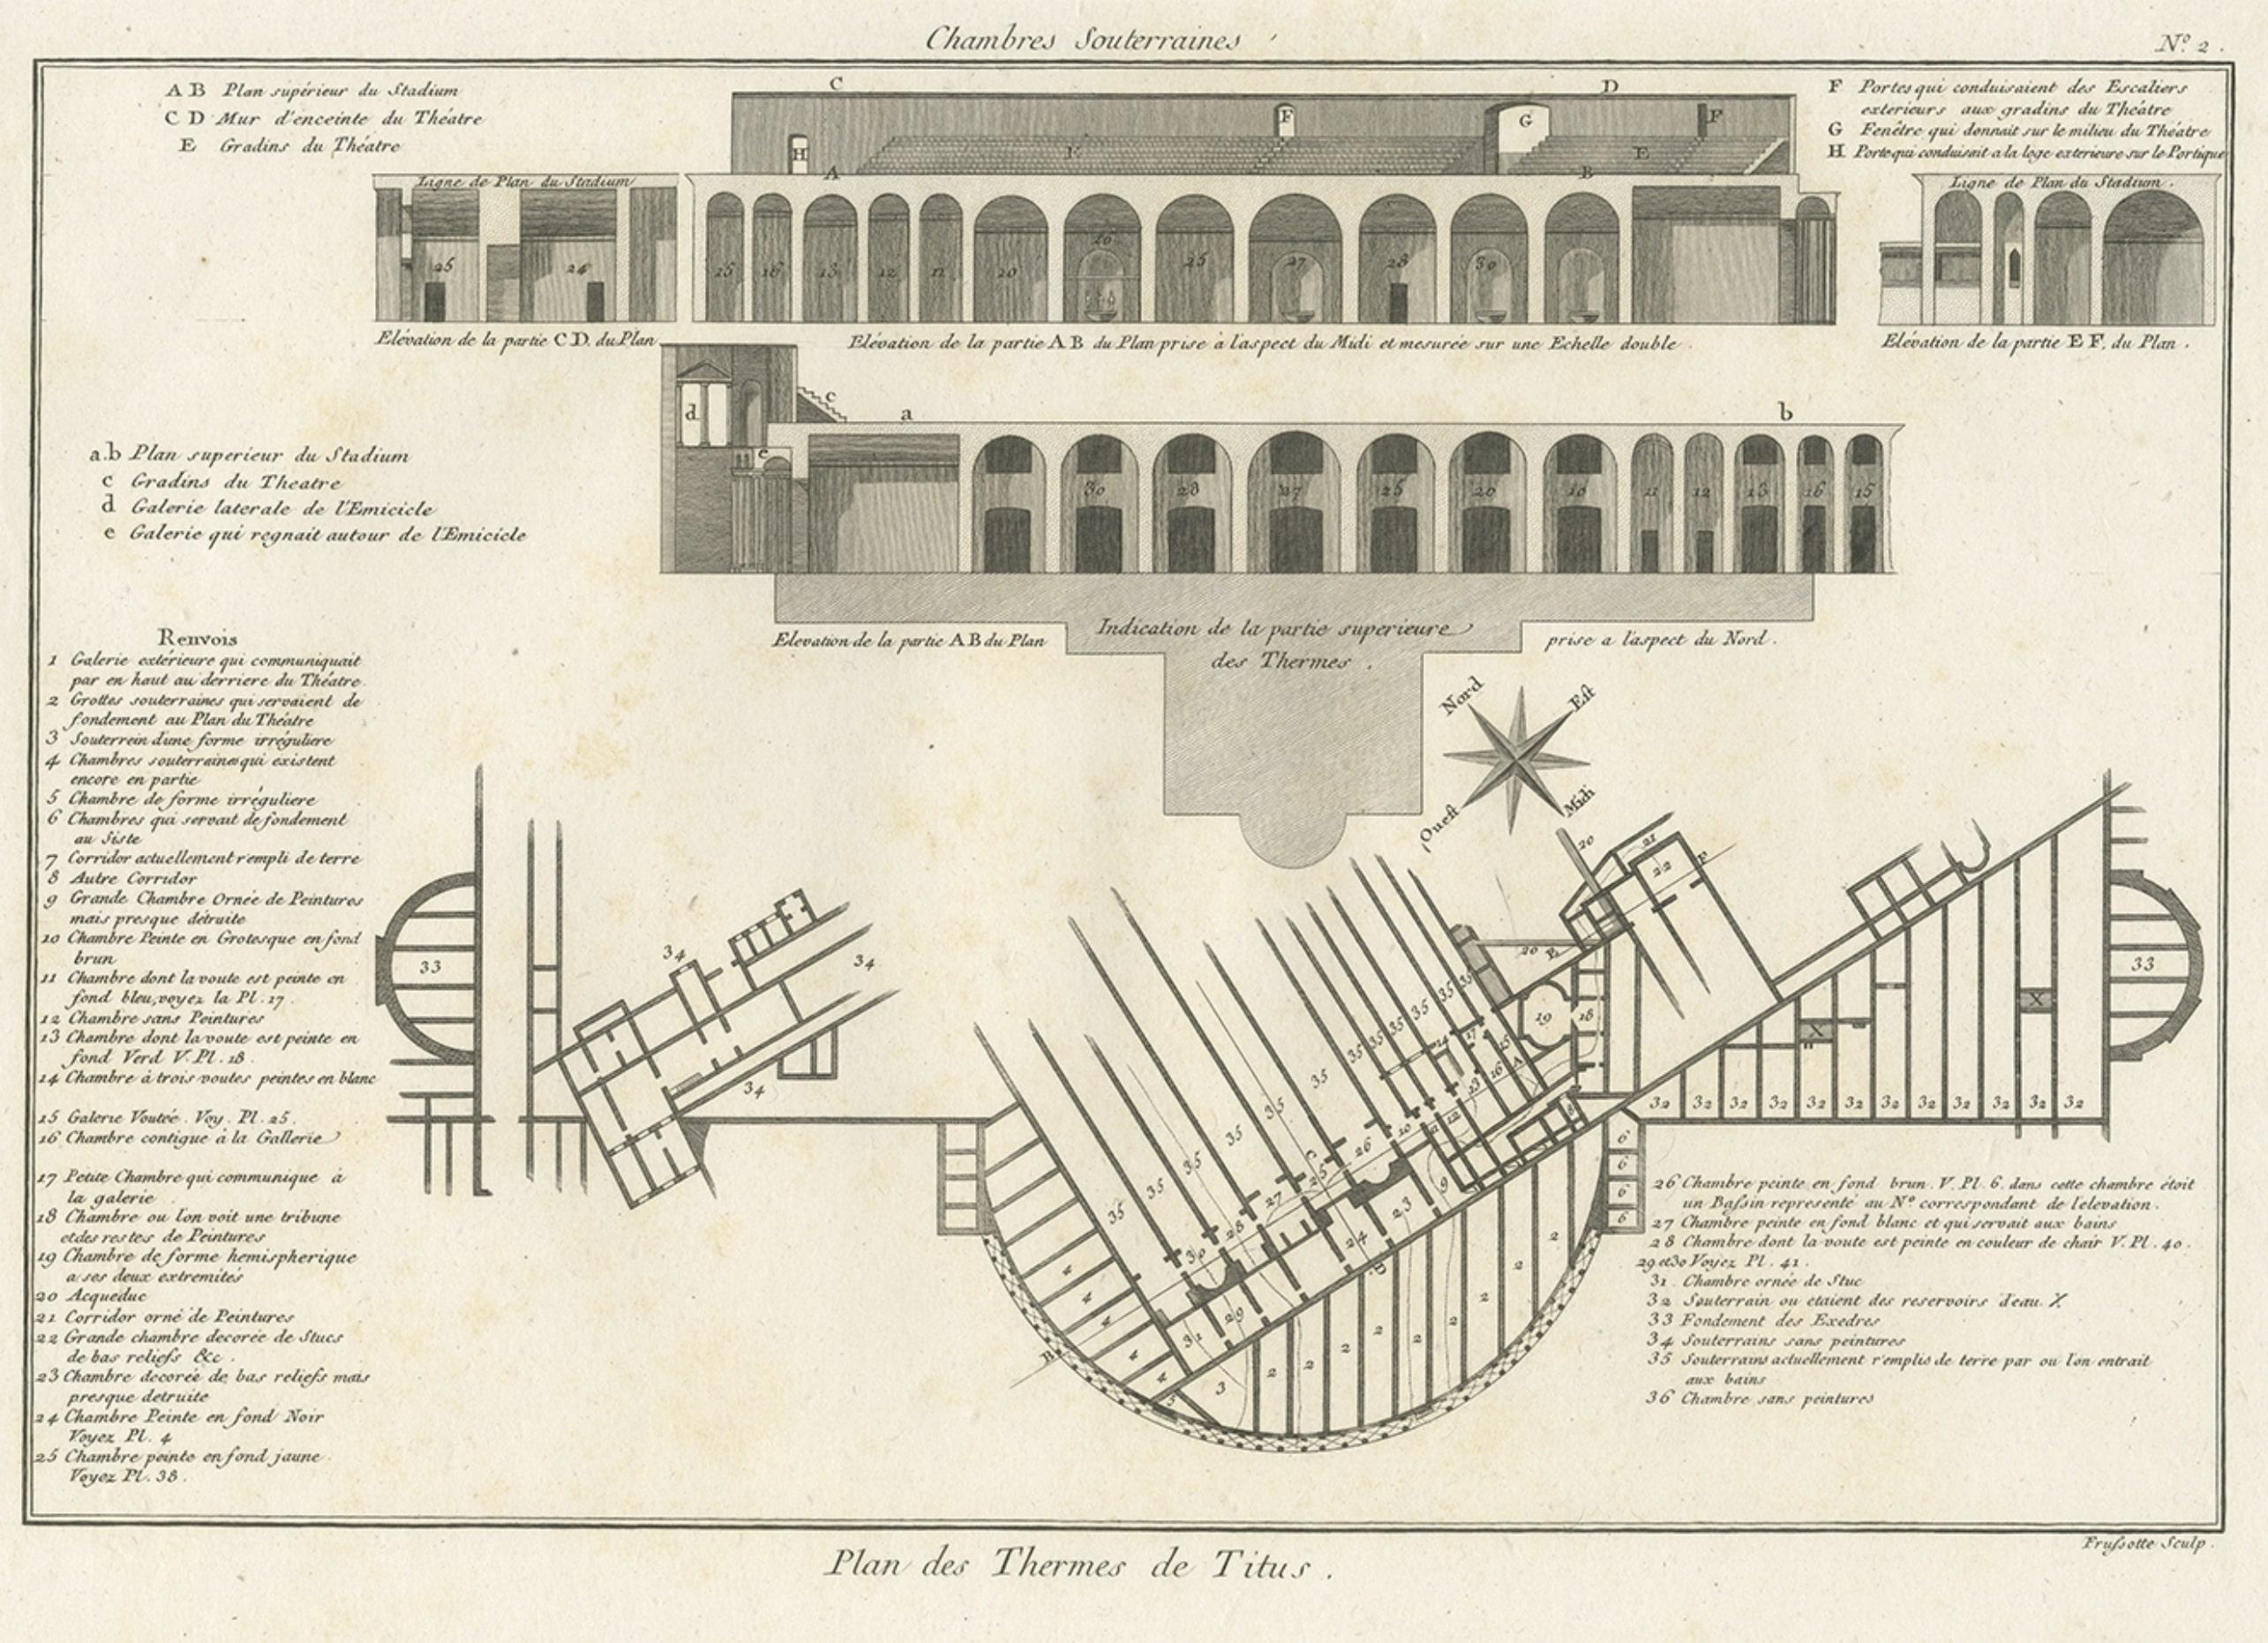 Antique print titled 'Plan des Thermes de Titus Partie Superieure'. 

Plan of the underground areas of the Baths of Titus. The Baths of Titus or Thermae Titi were public baths (Thermae) built in 81 AD at Rome, by Roman emperor Titus. This print